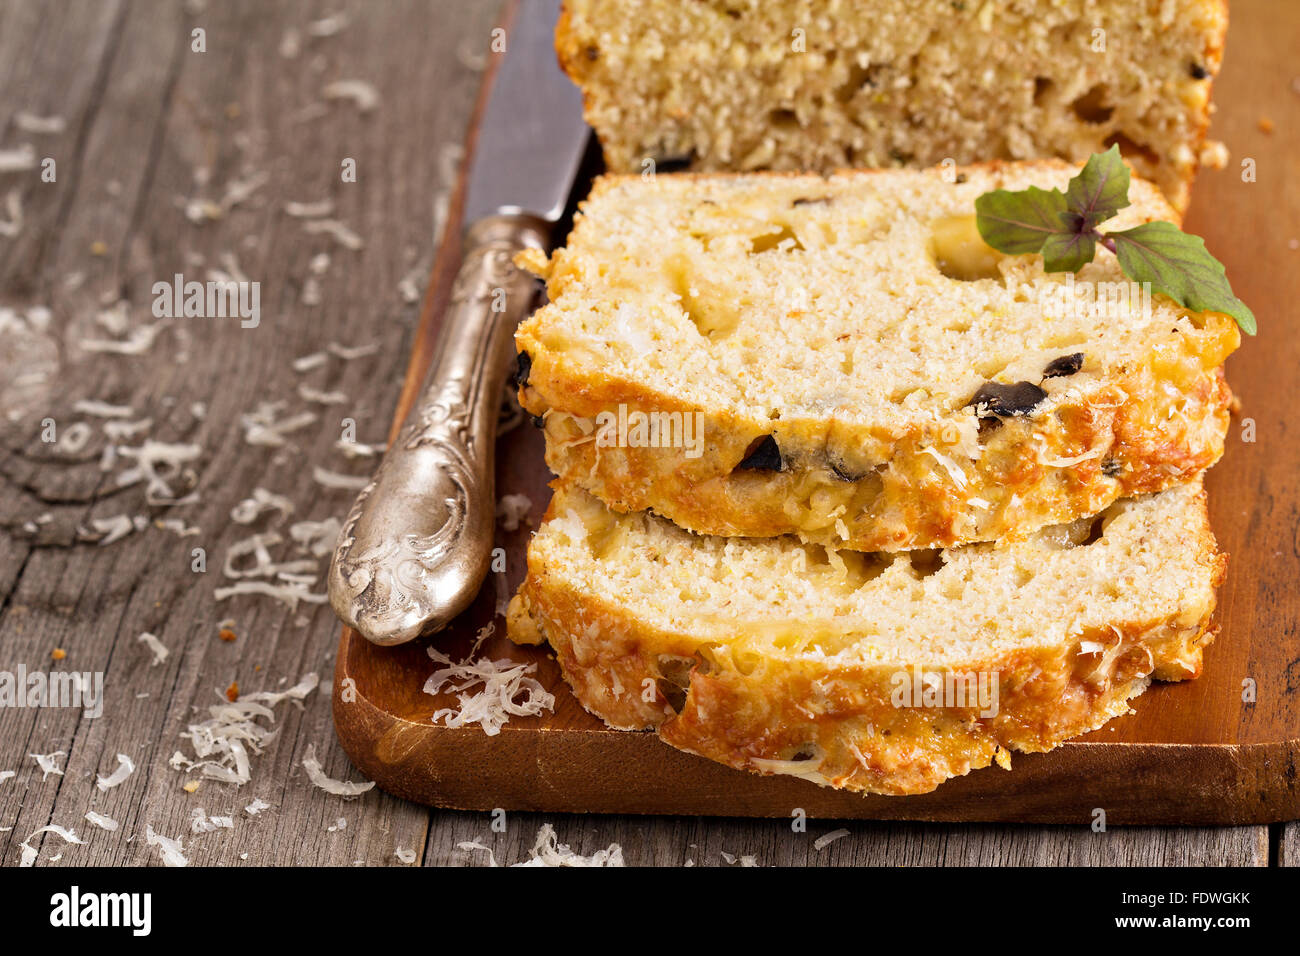 Savoury loaf cake with cheese and olives Stock Photo